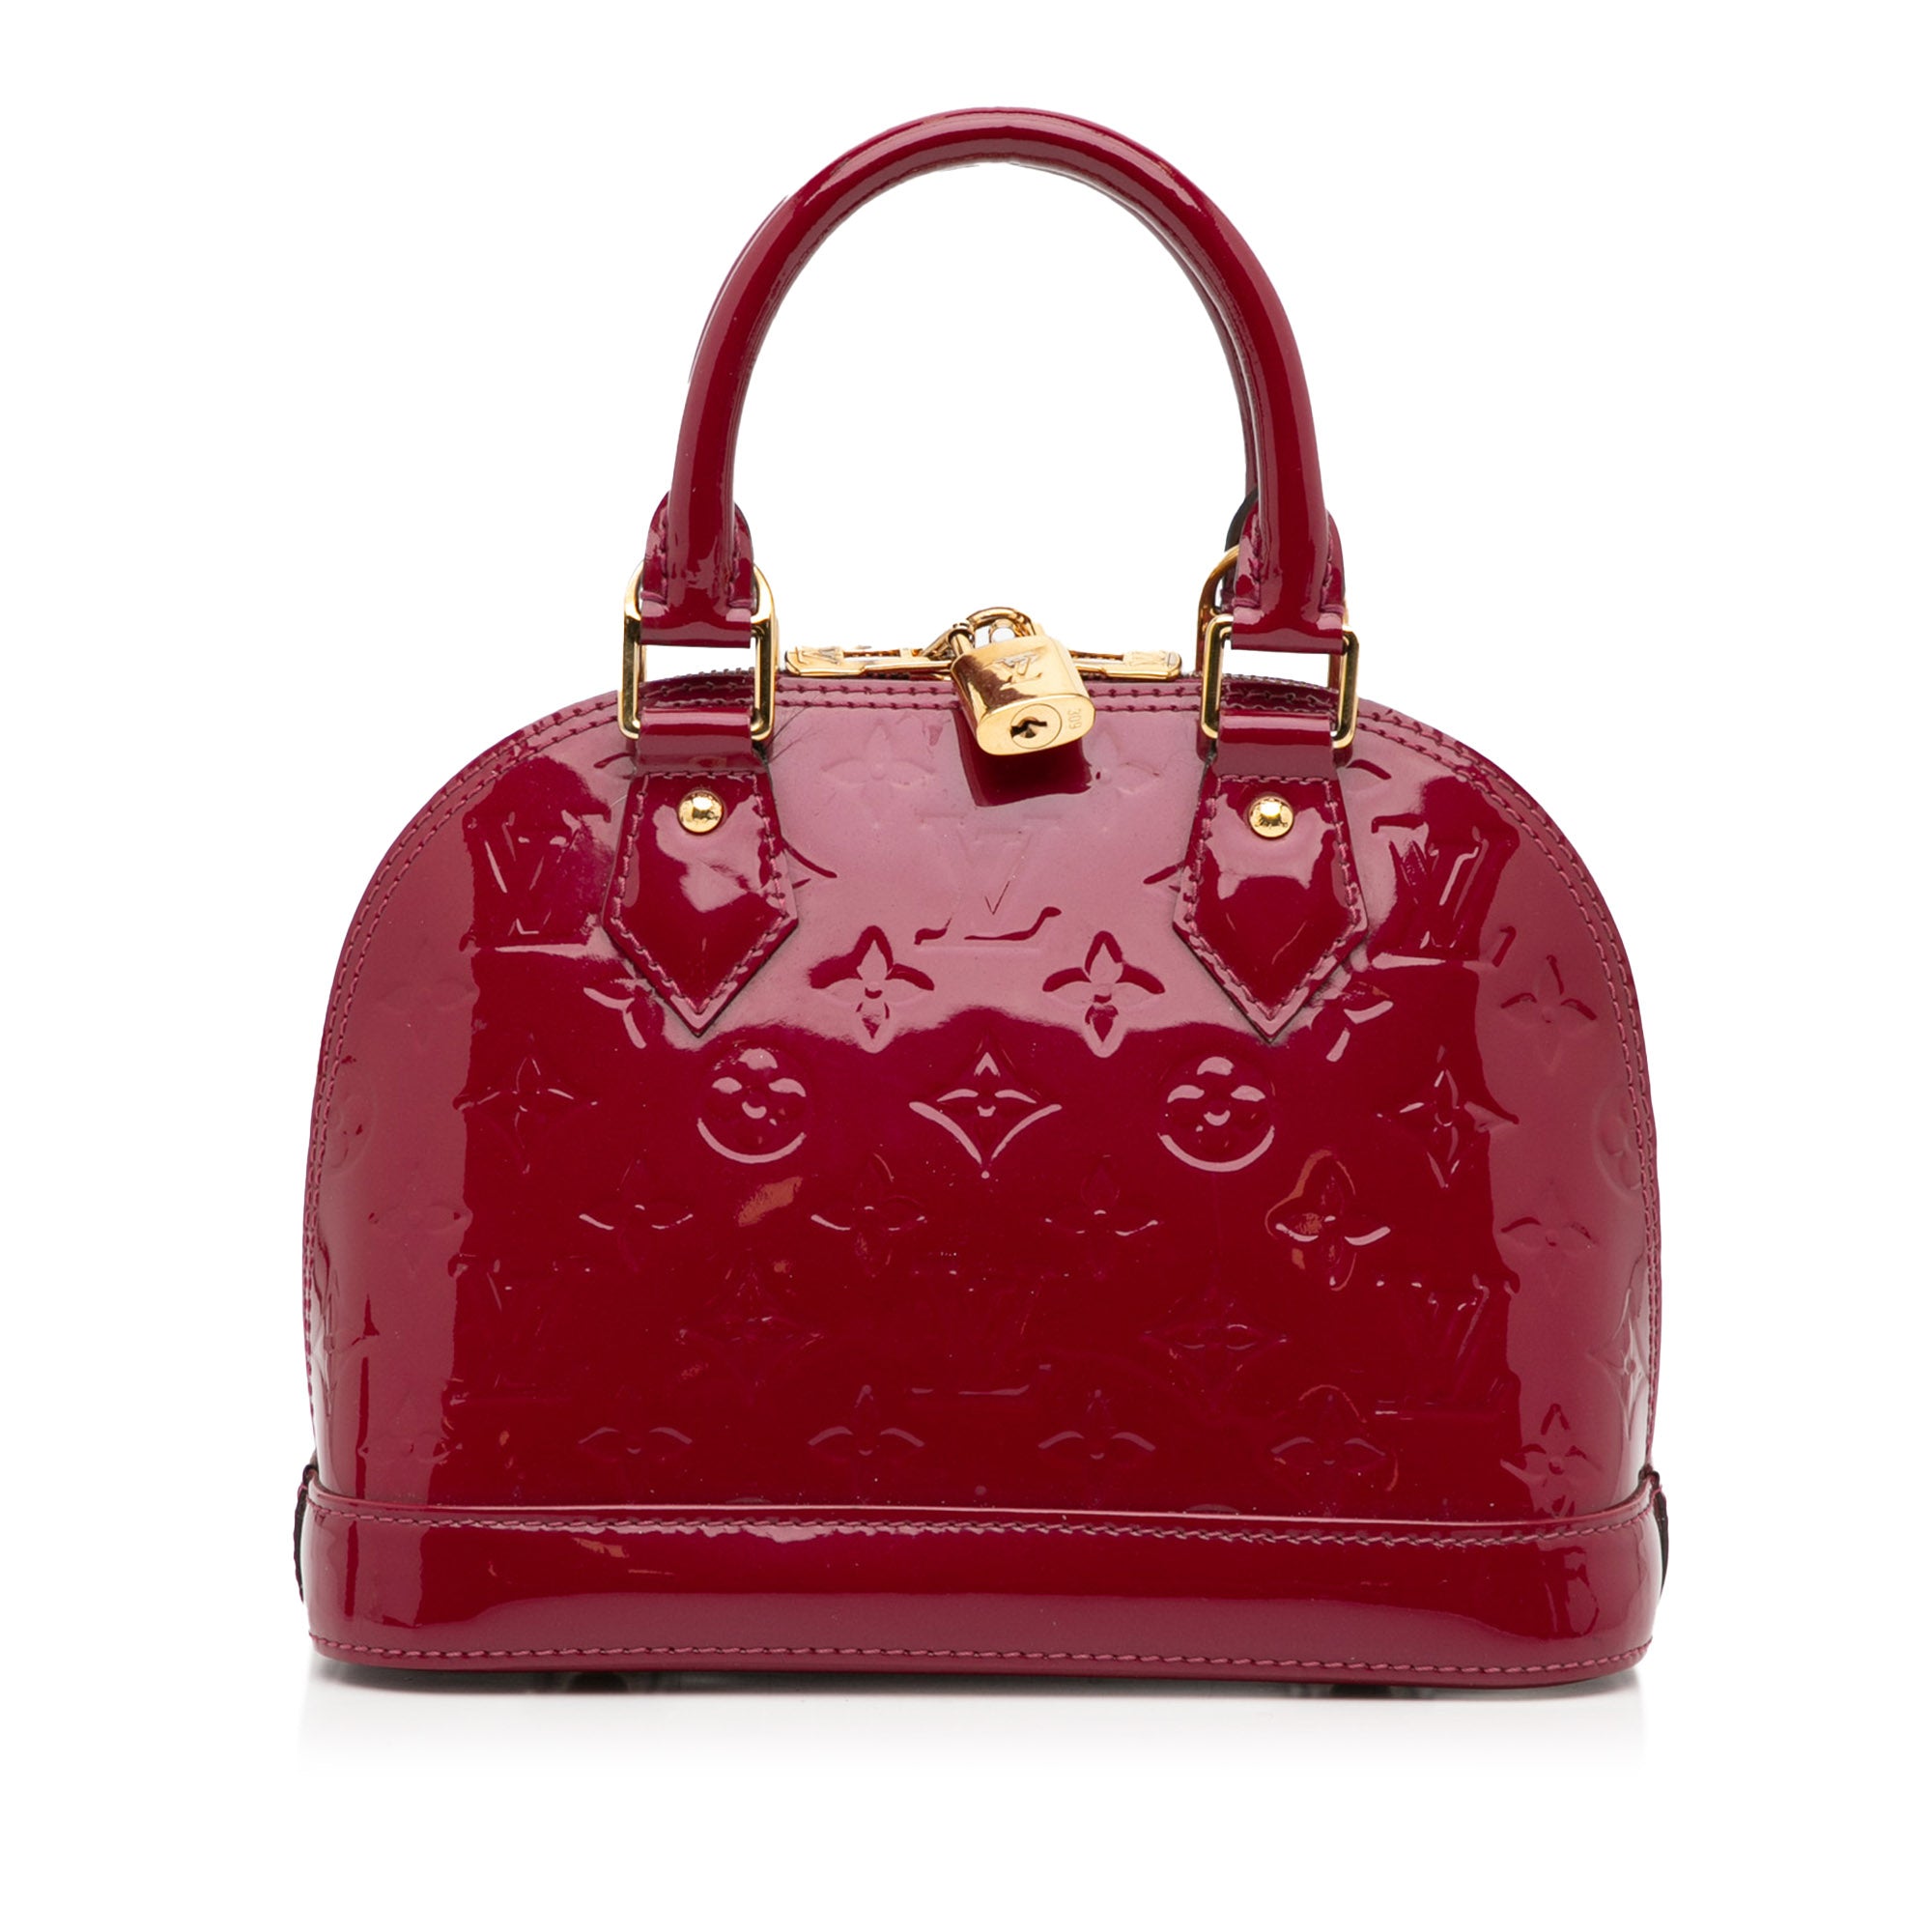 Louis Vuitton Alma Red Patent Leather Handbag (Pre-Owned)